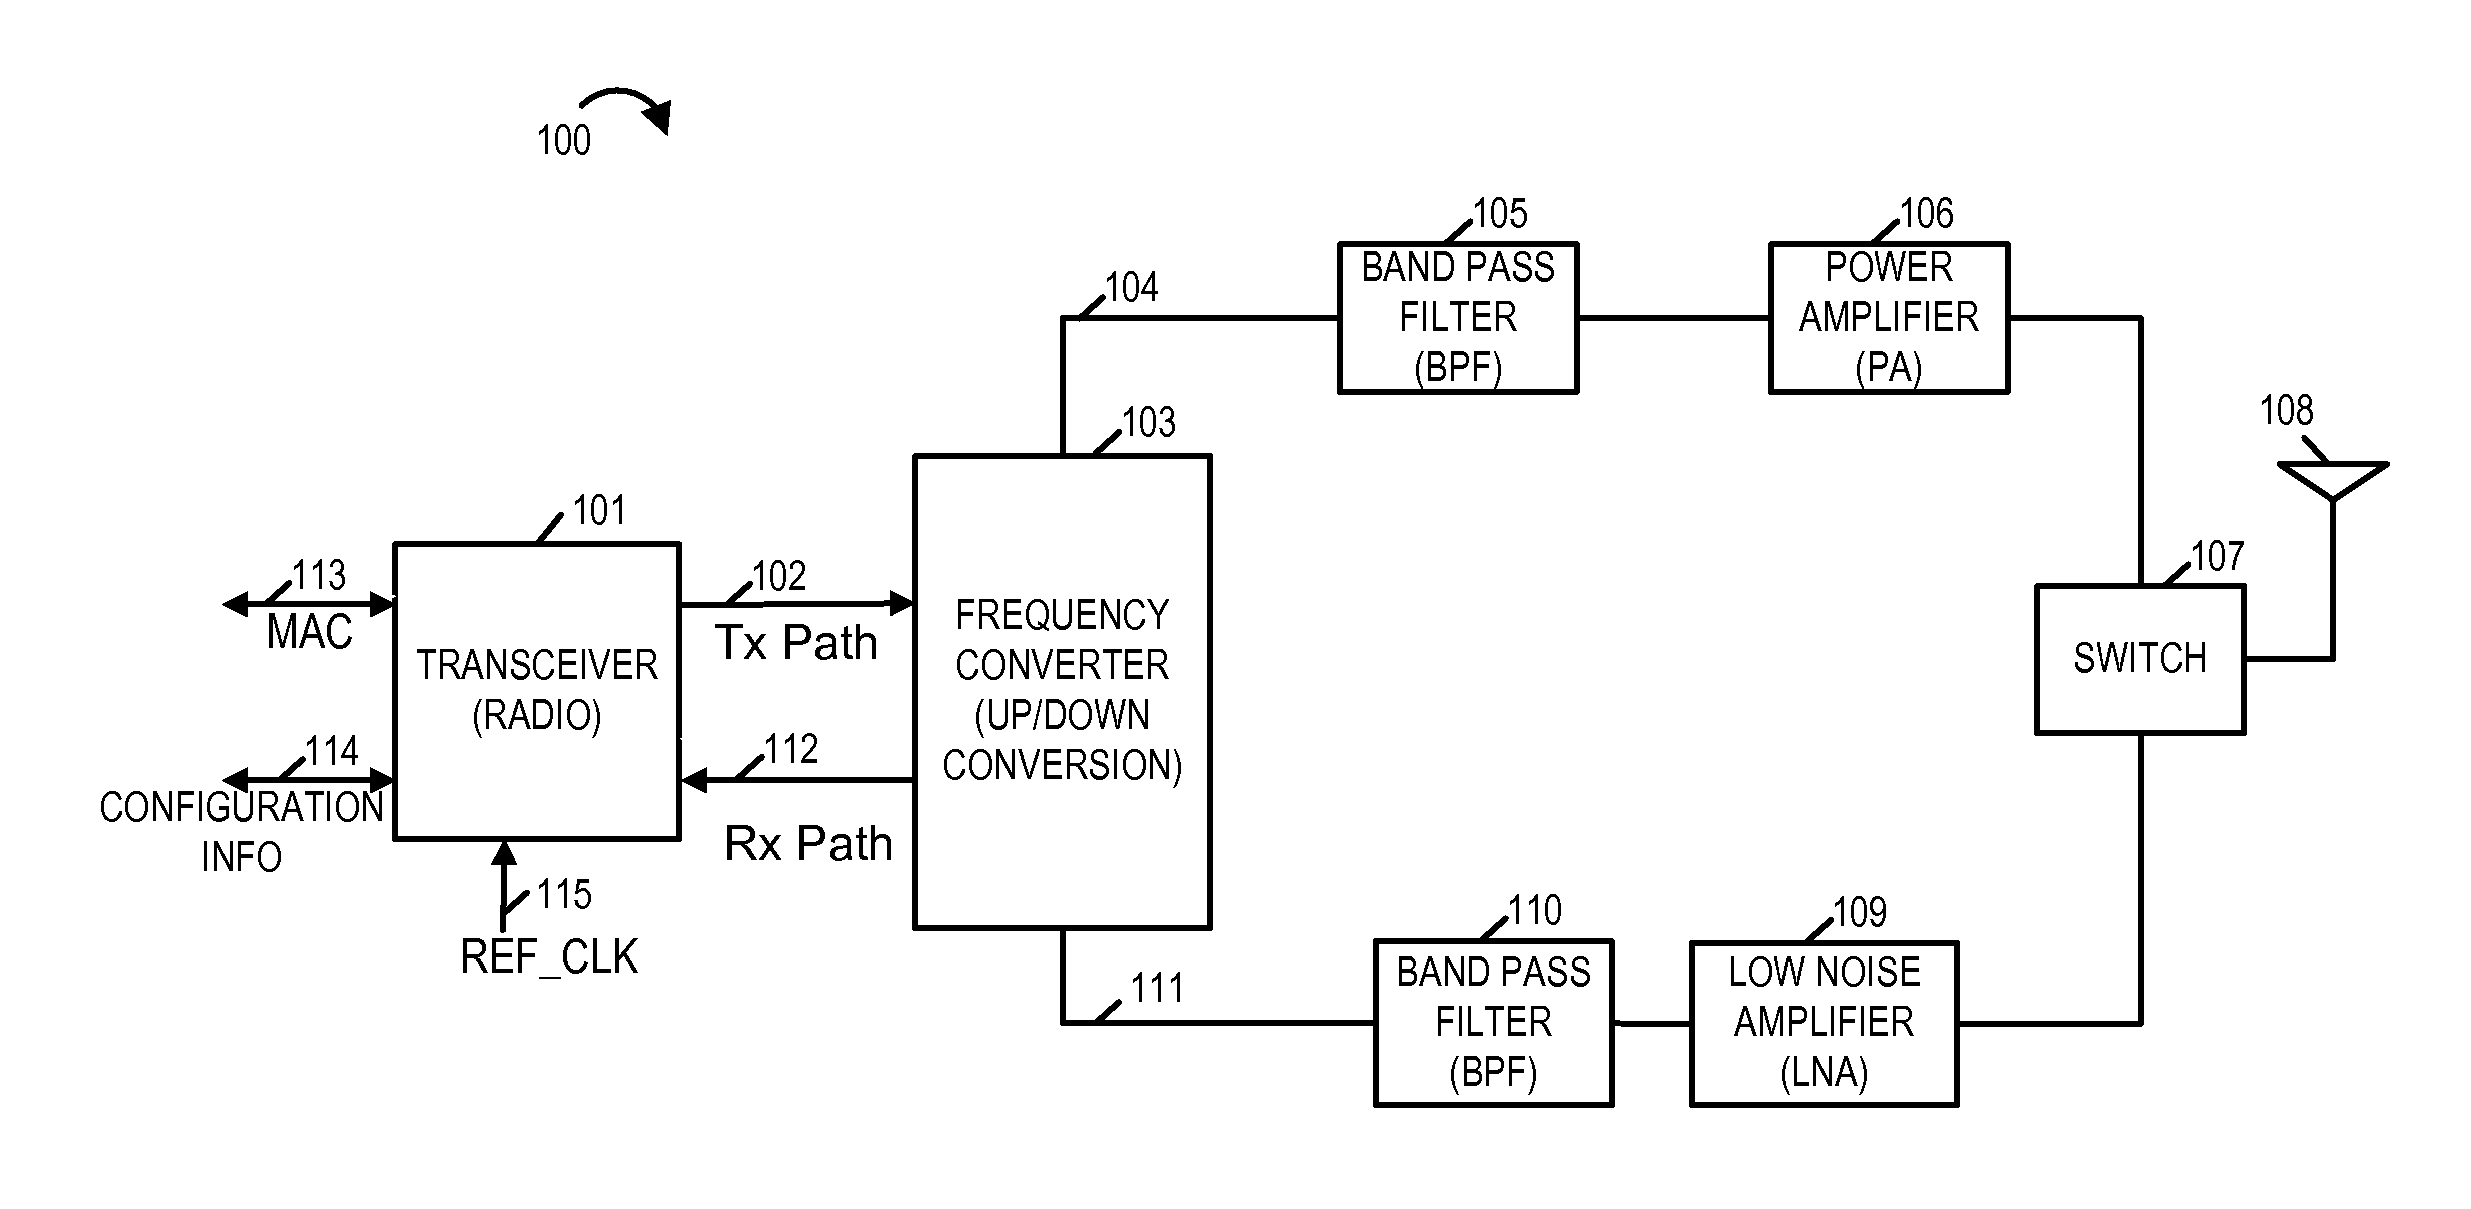 Methods and apparatus for using WLAN chips to support communications in licensed frequency bands